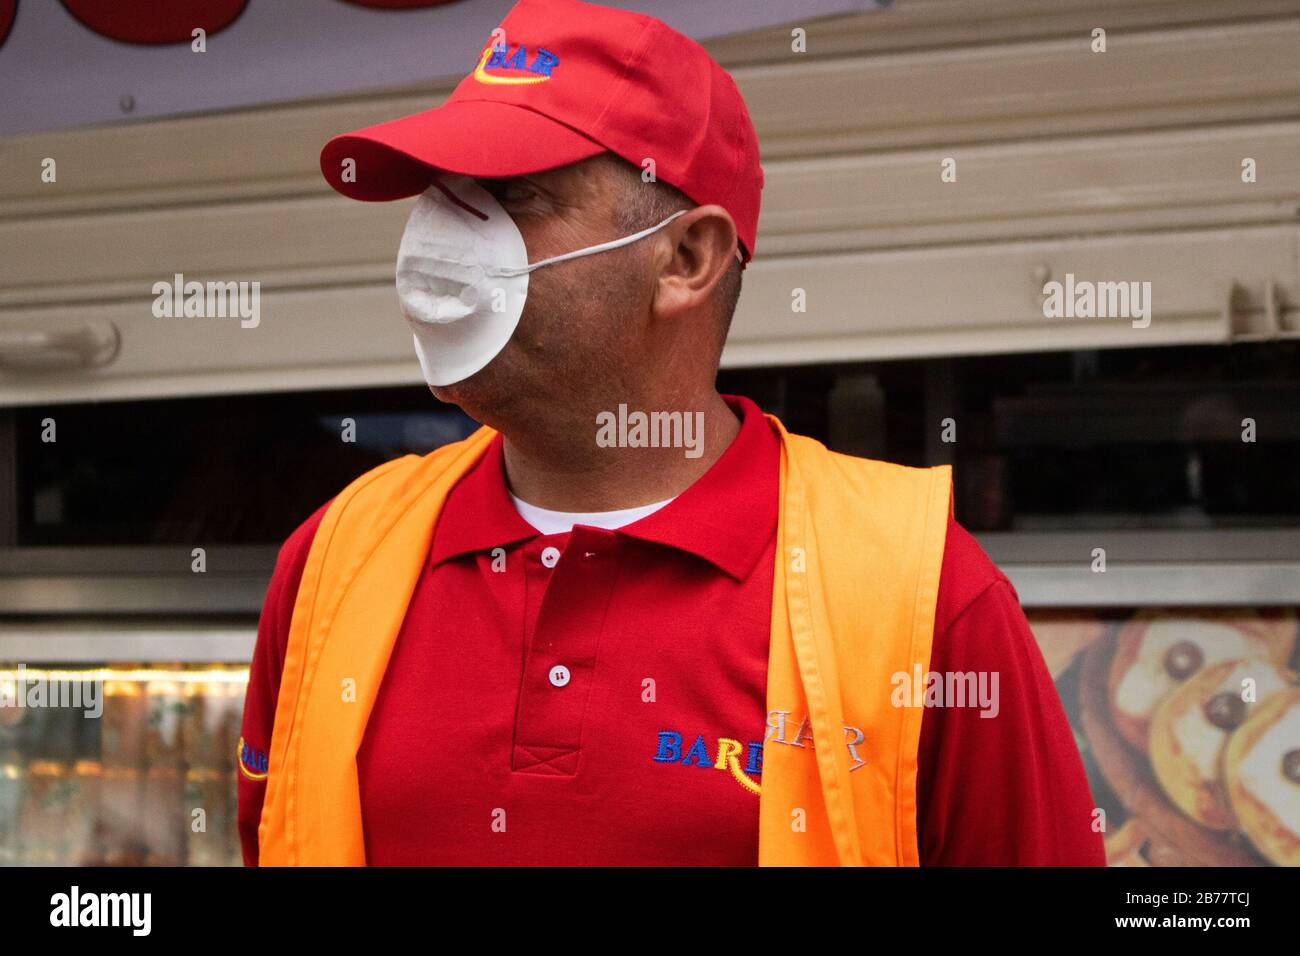 BEIRUT, LEBANON. 14 March 2020.  A man working for a fast food restaurant in Hamra Street Beirut wearing a protective face mask against covid 19 novel coronavirus during the ongoing coronavirus health crisis. Credit: amer ghazzal/Alamy Live News Stock Photo